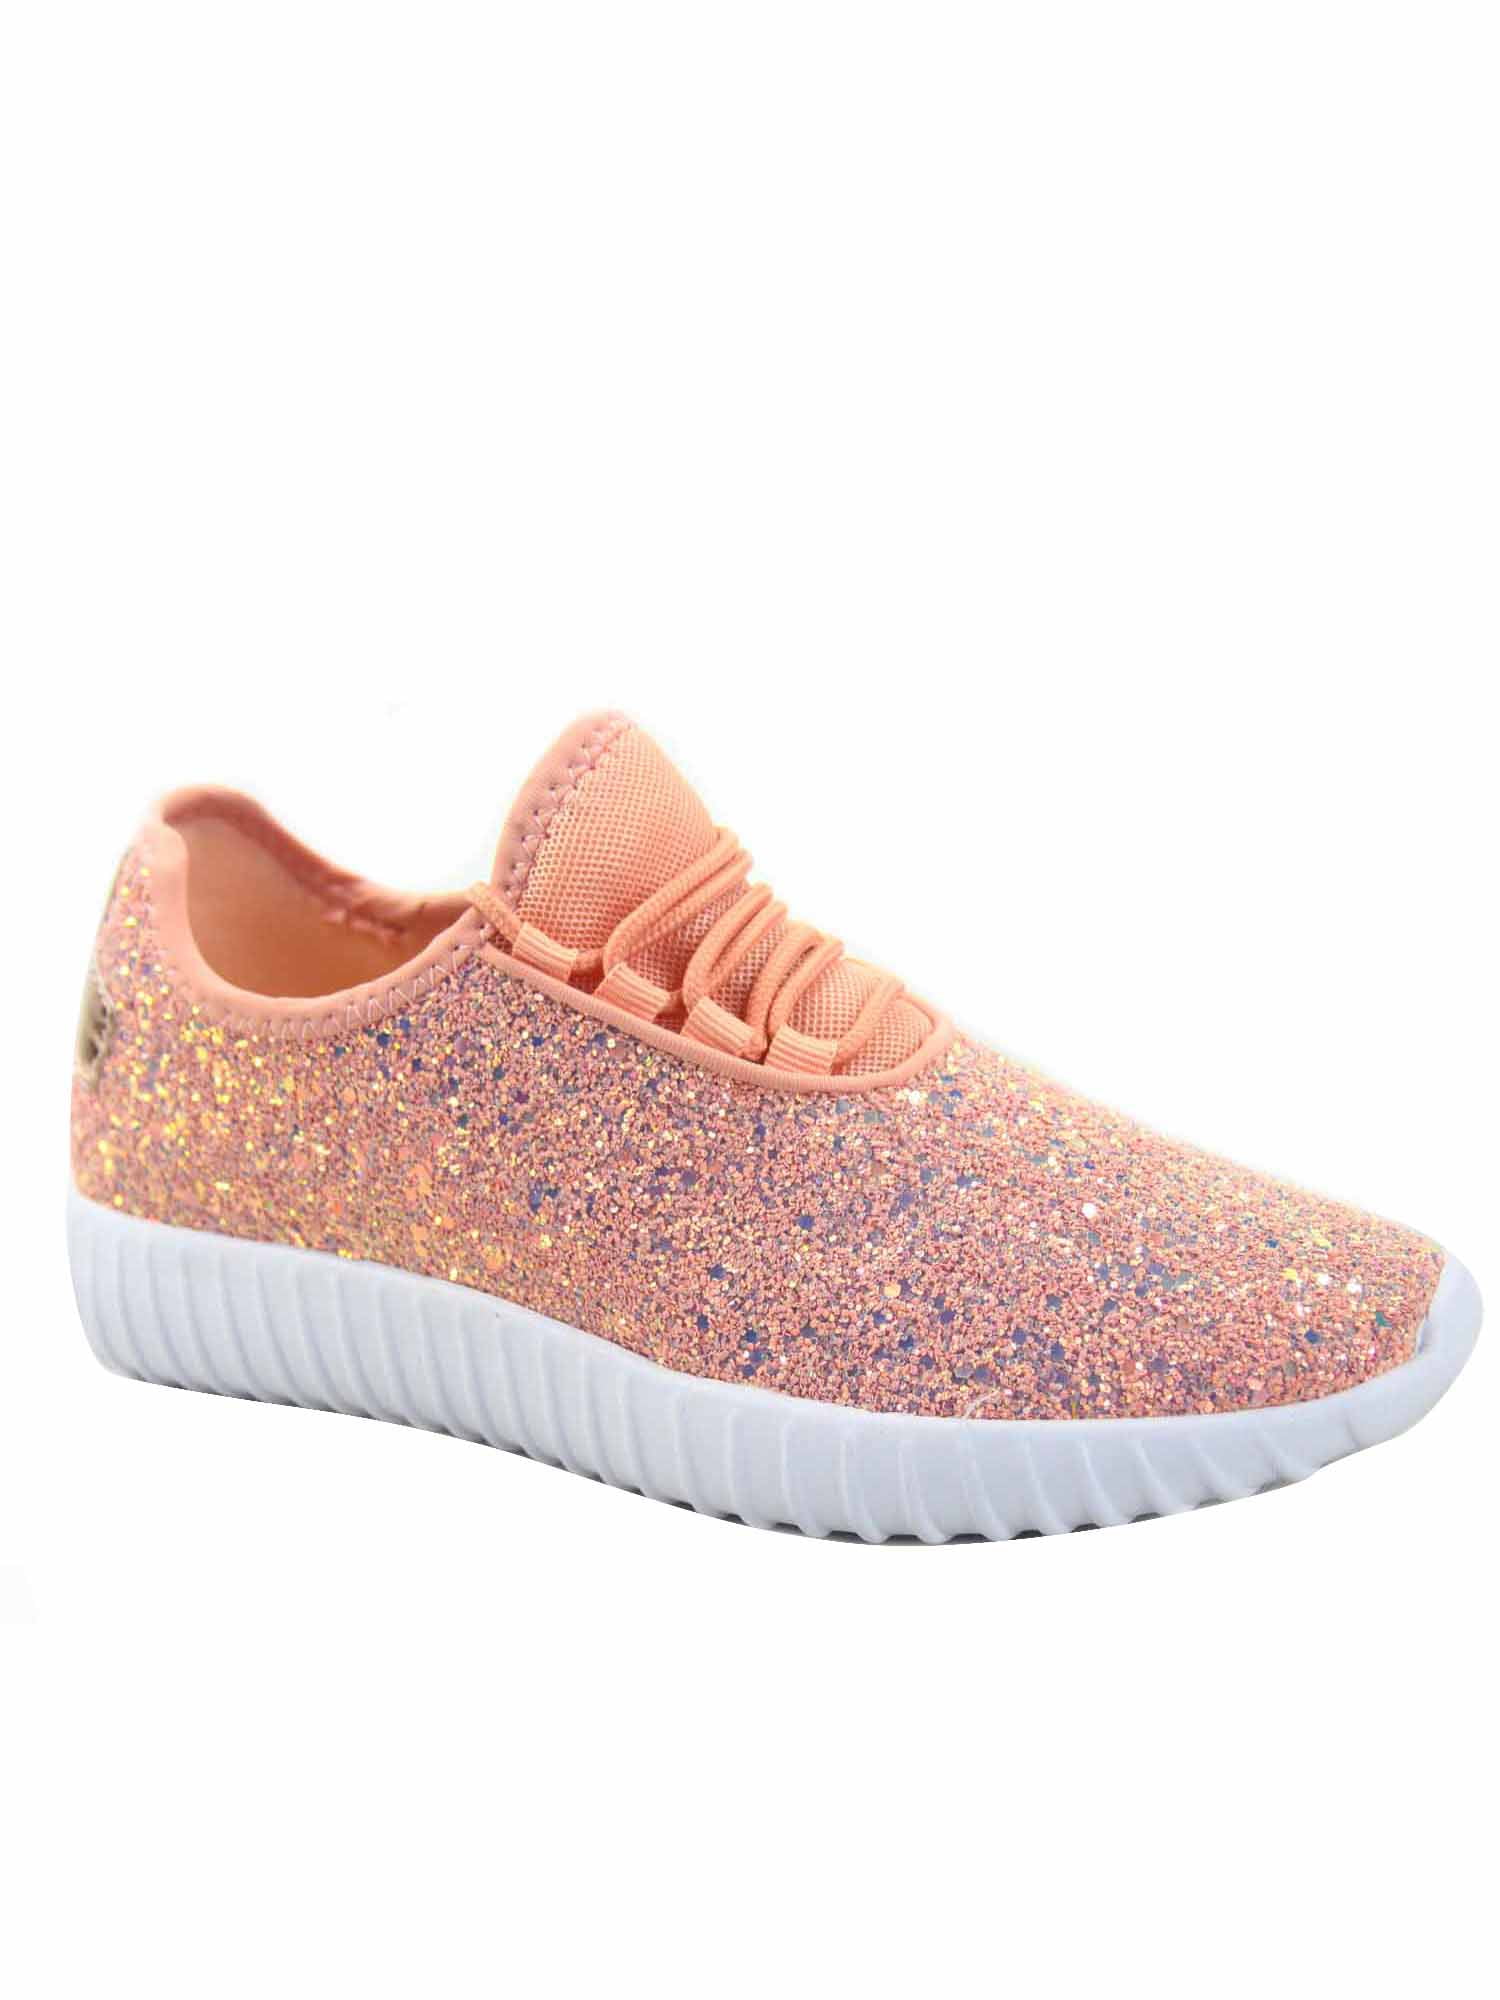 Women's Remy-18 Glitter Sneakers, Fashion Sneakers, Sparkly Shoes for  Women - Pink - CU185UX7WS0